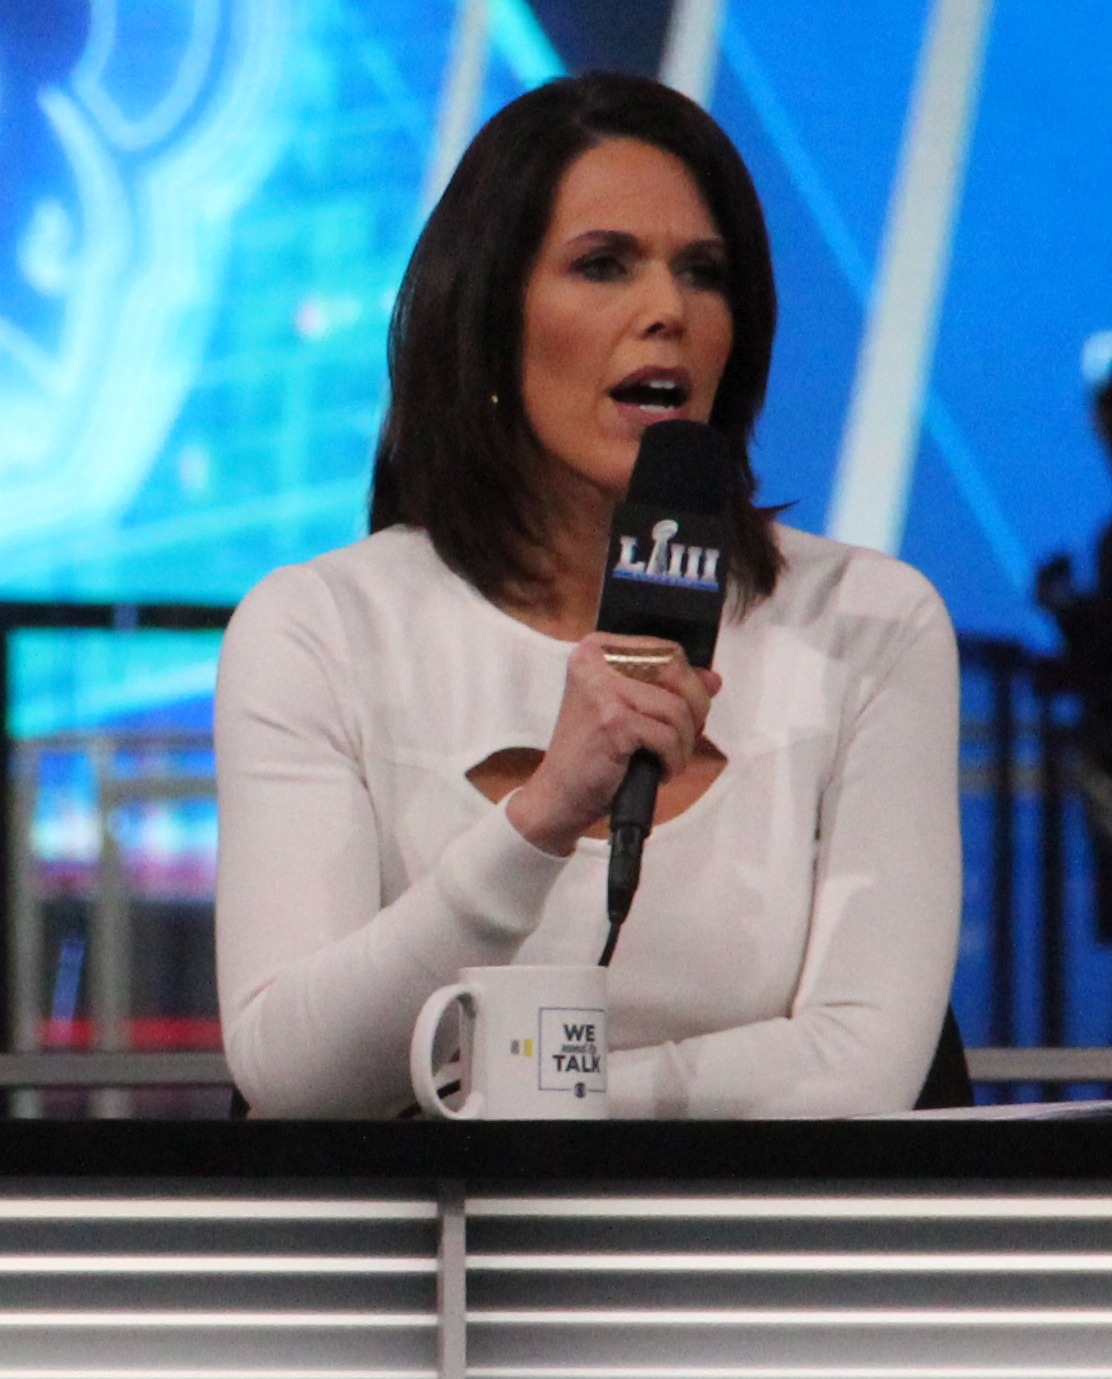 woman in white top holding microphone